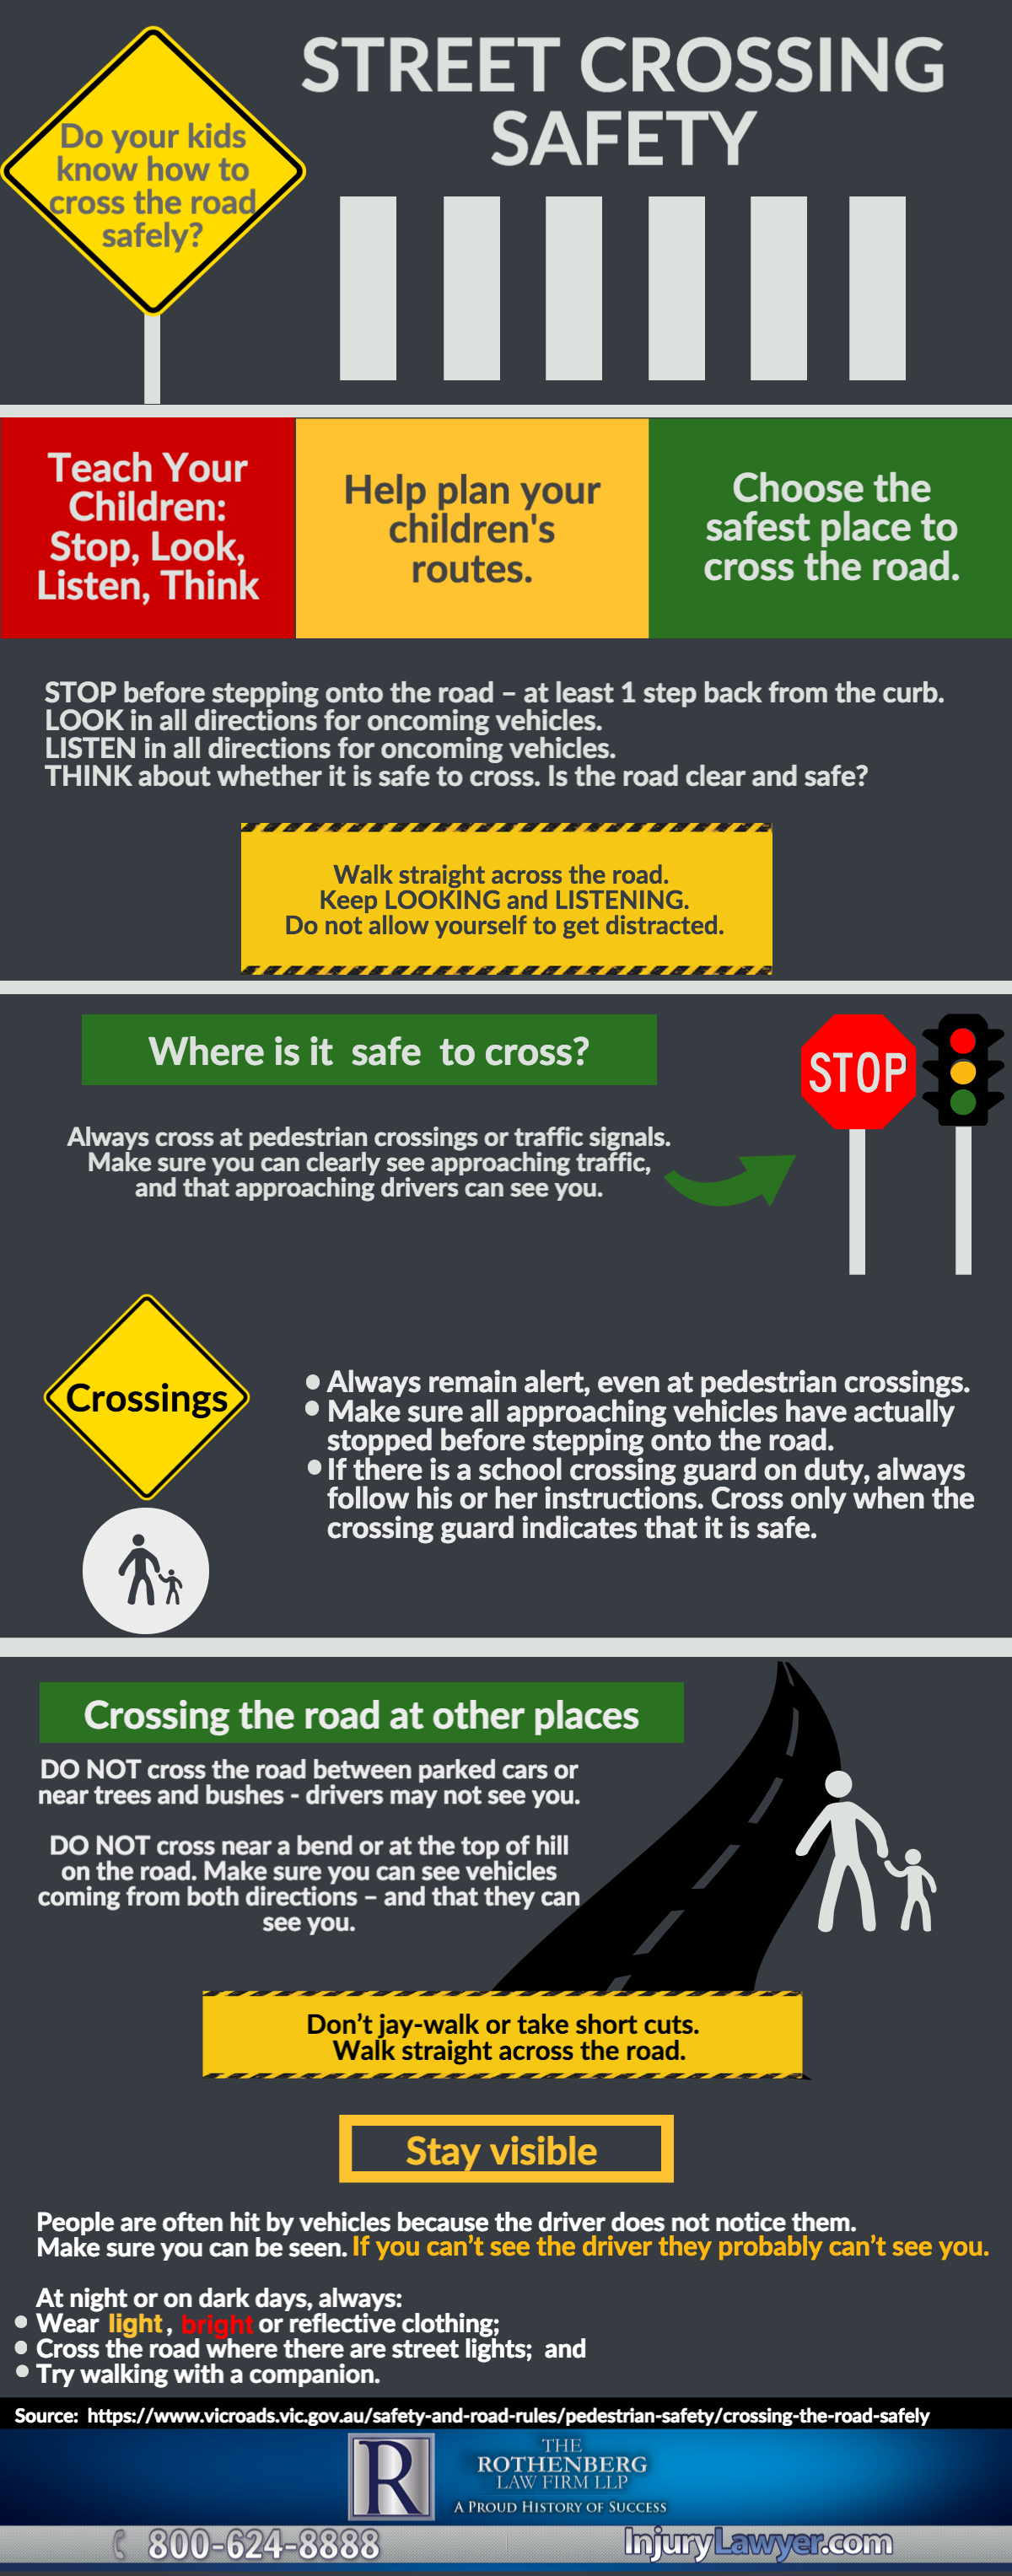 Street Crossing Safety Infographic